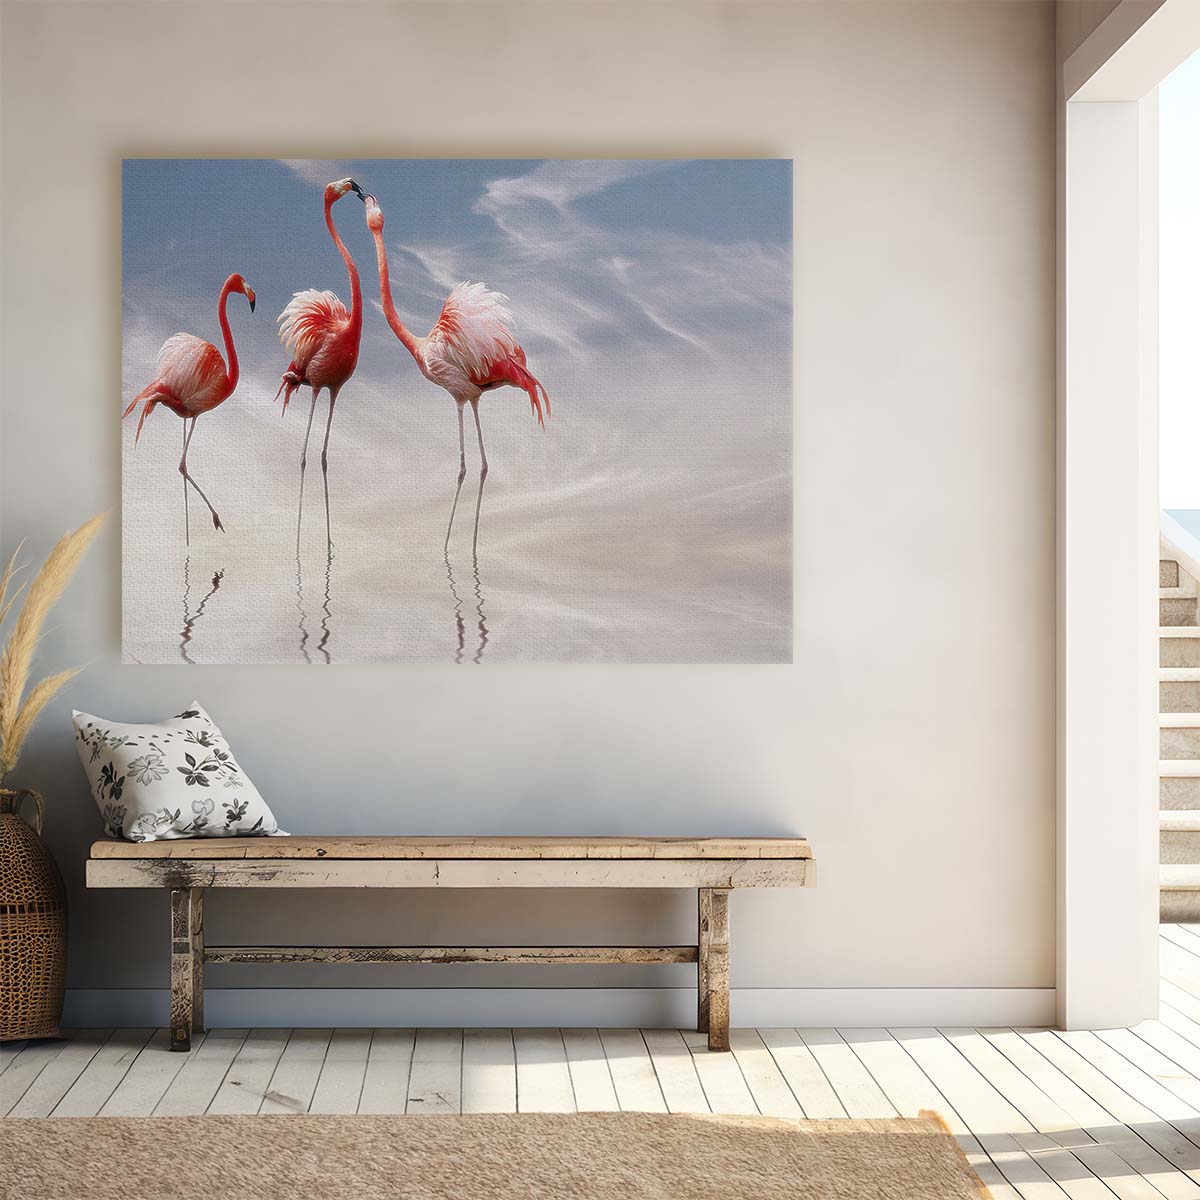 Romantic Flamingo Sunset Embrace Wall Art by Luxuriance Designs. Made in USA.